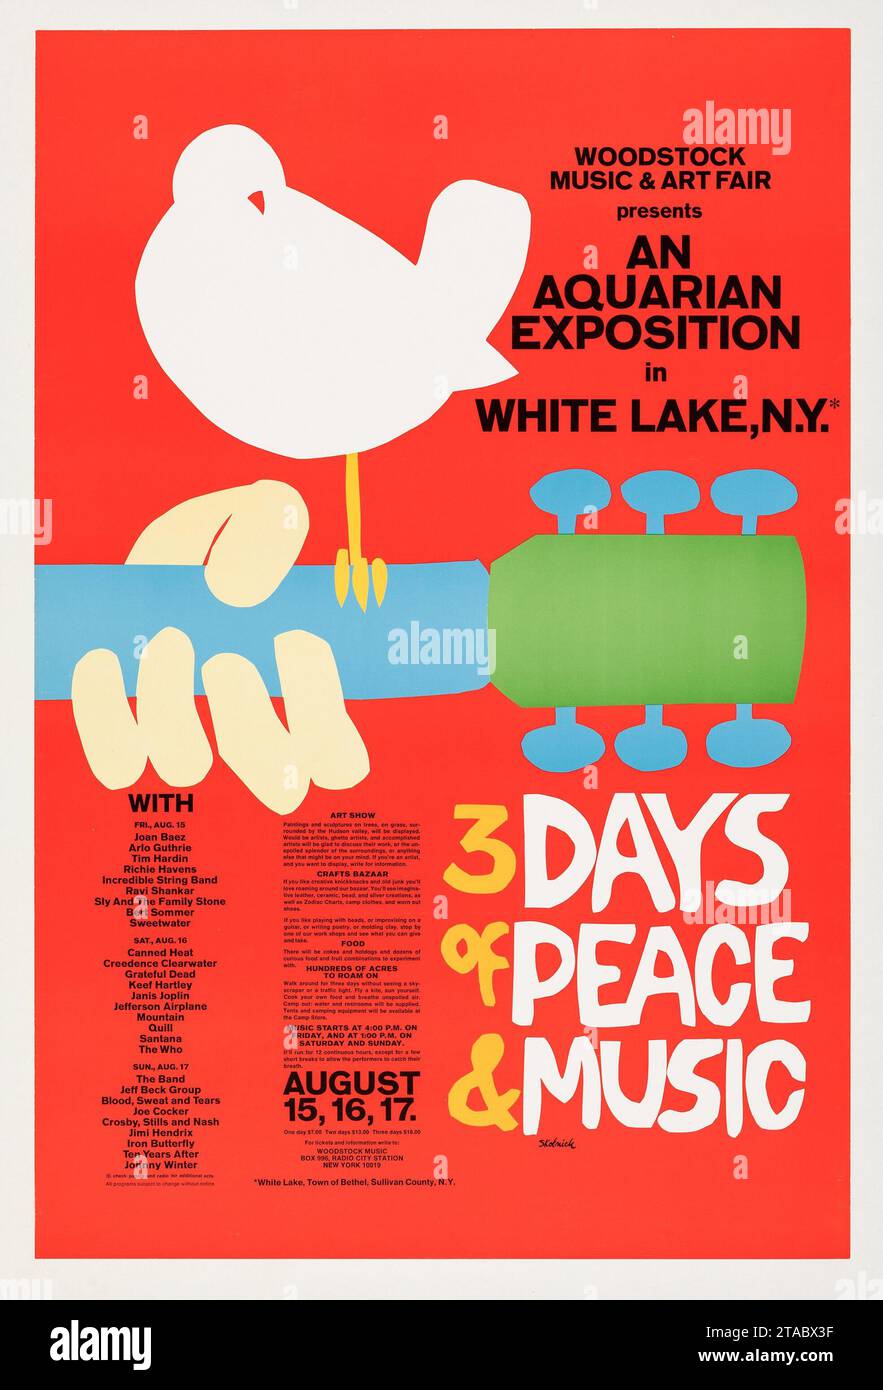 Woodstock, August 1969 Vintage Concert Poster - 3 days of Peace & Music, White Lake New York Stock Photo